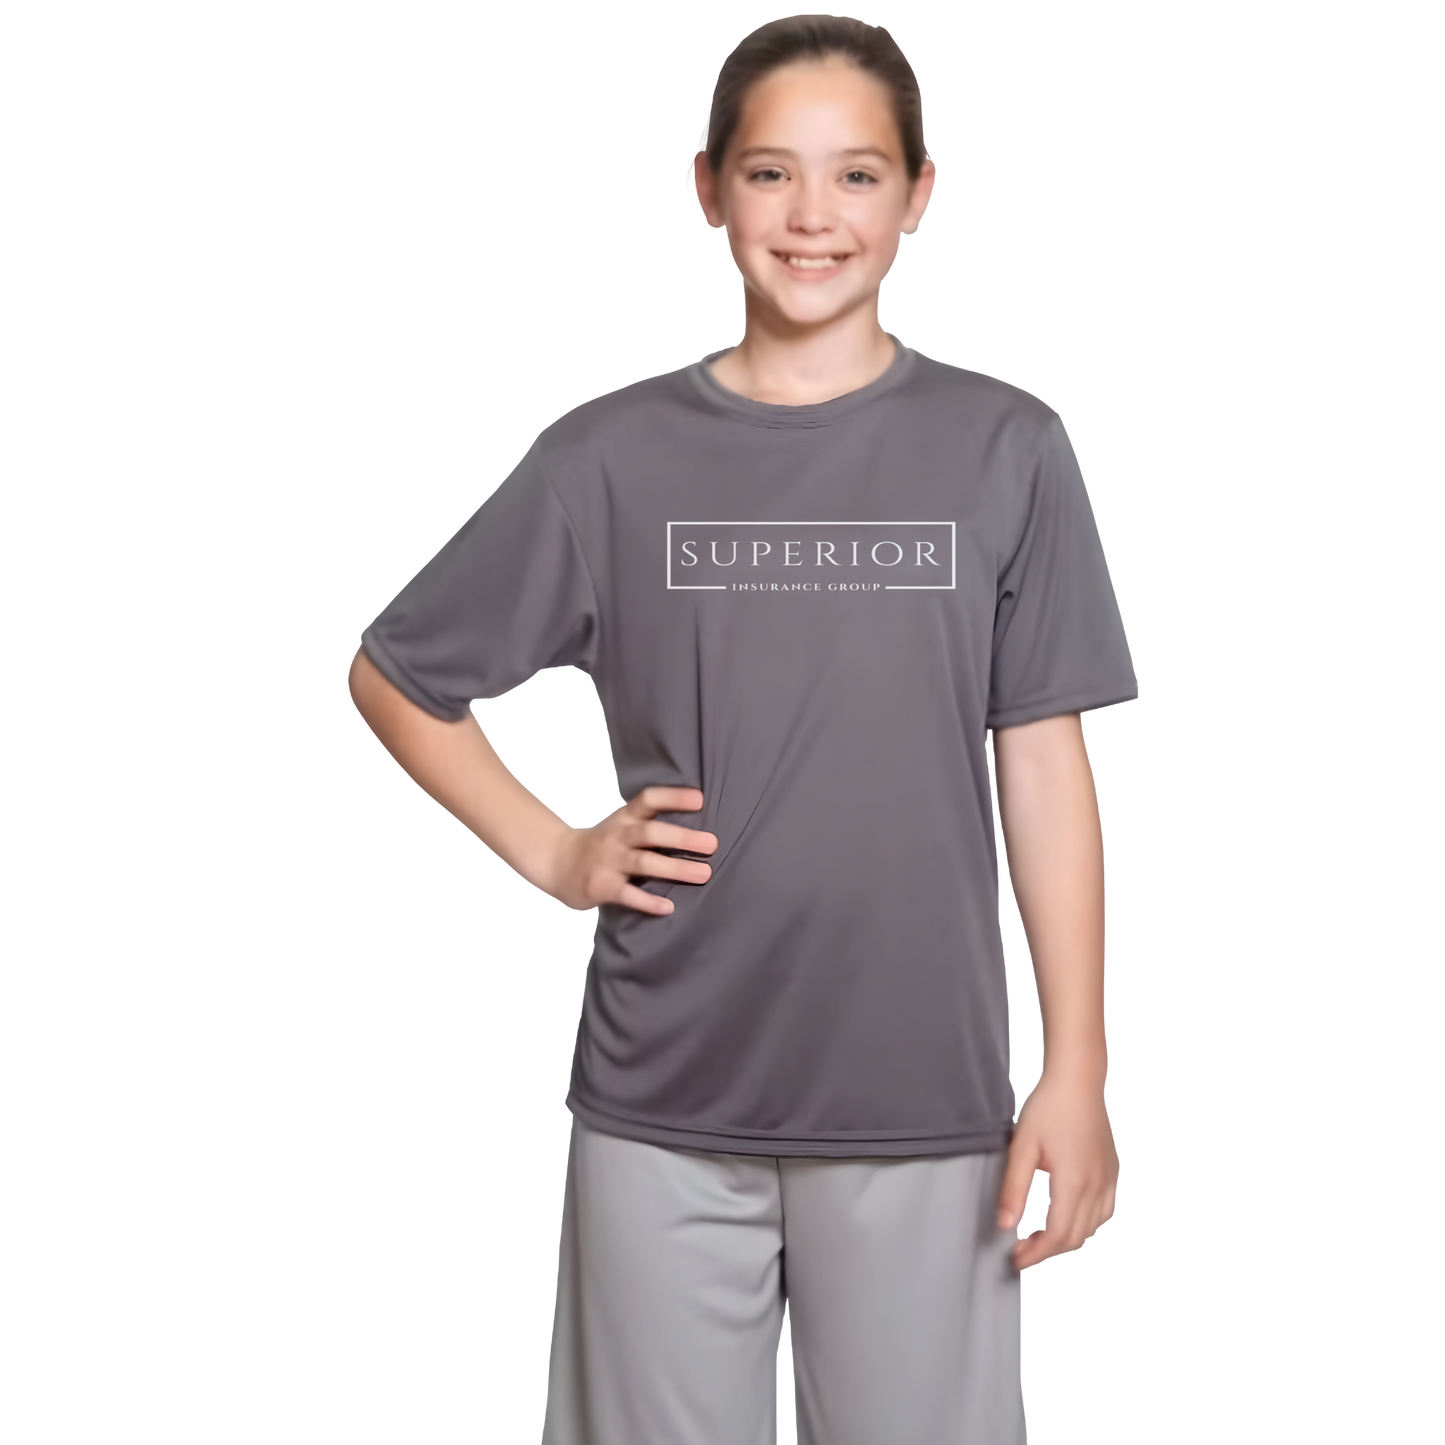 Youth Superior Short Sleeve Cooling Tee